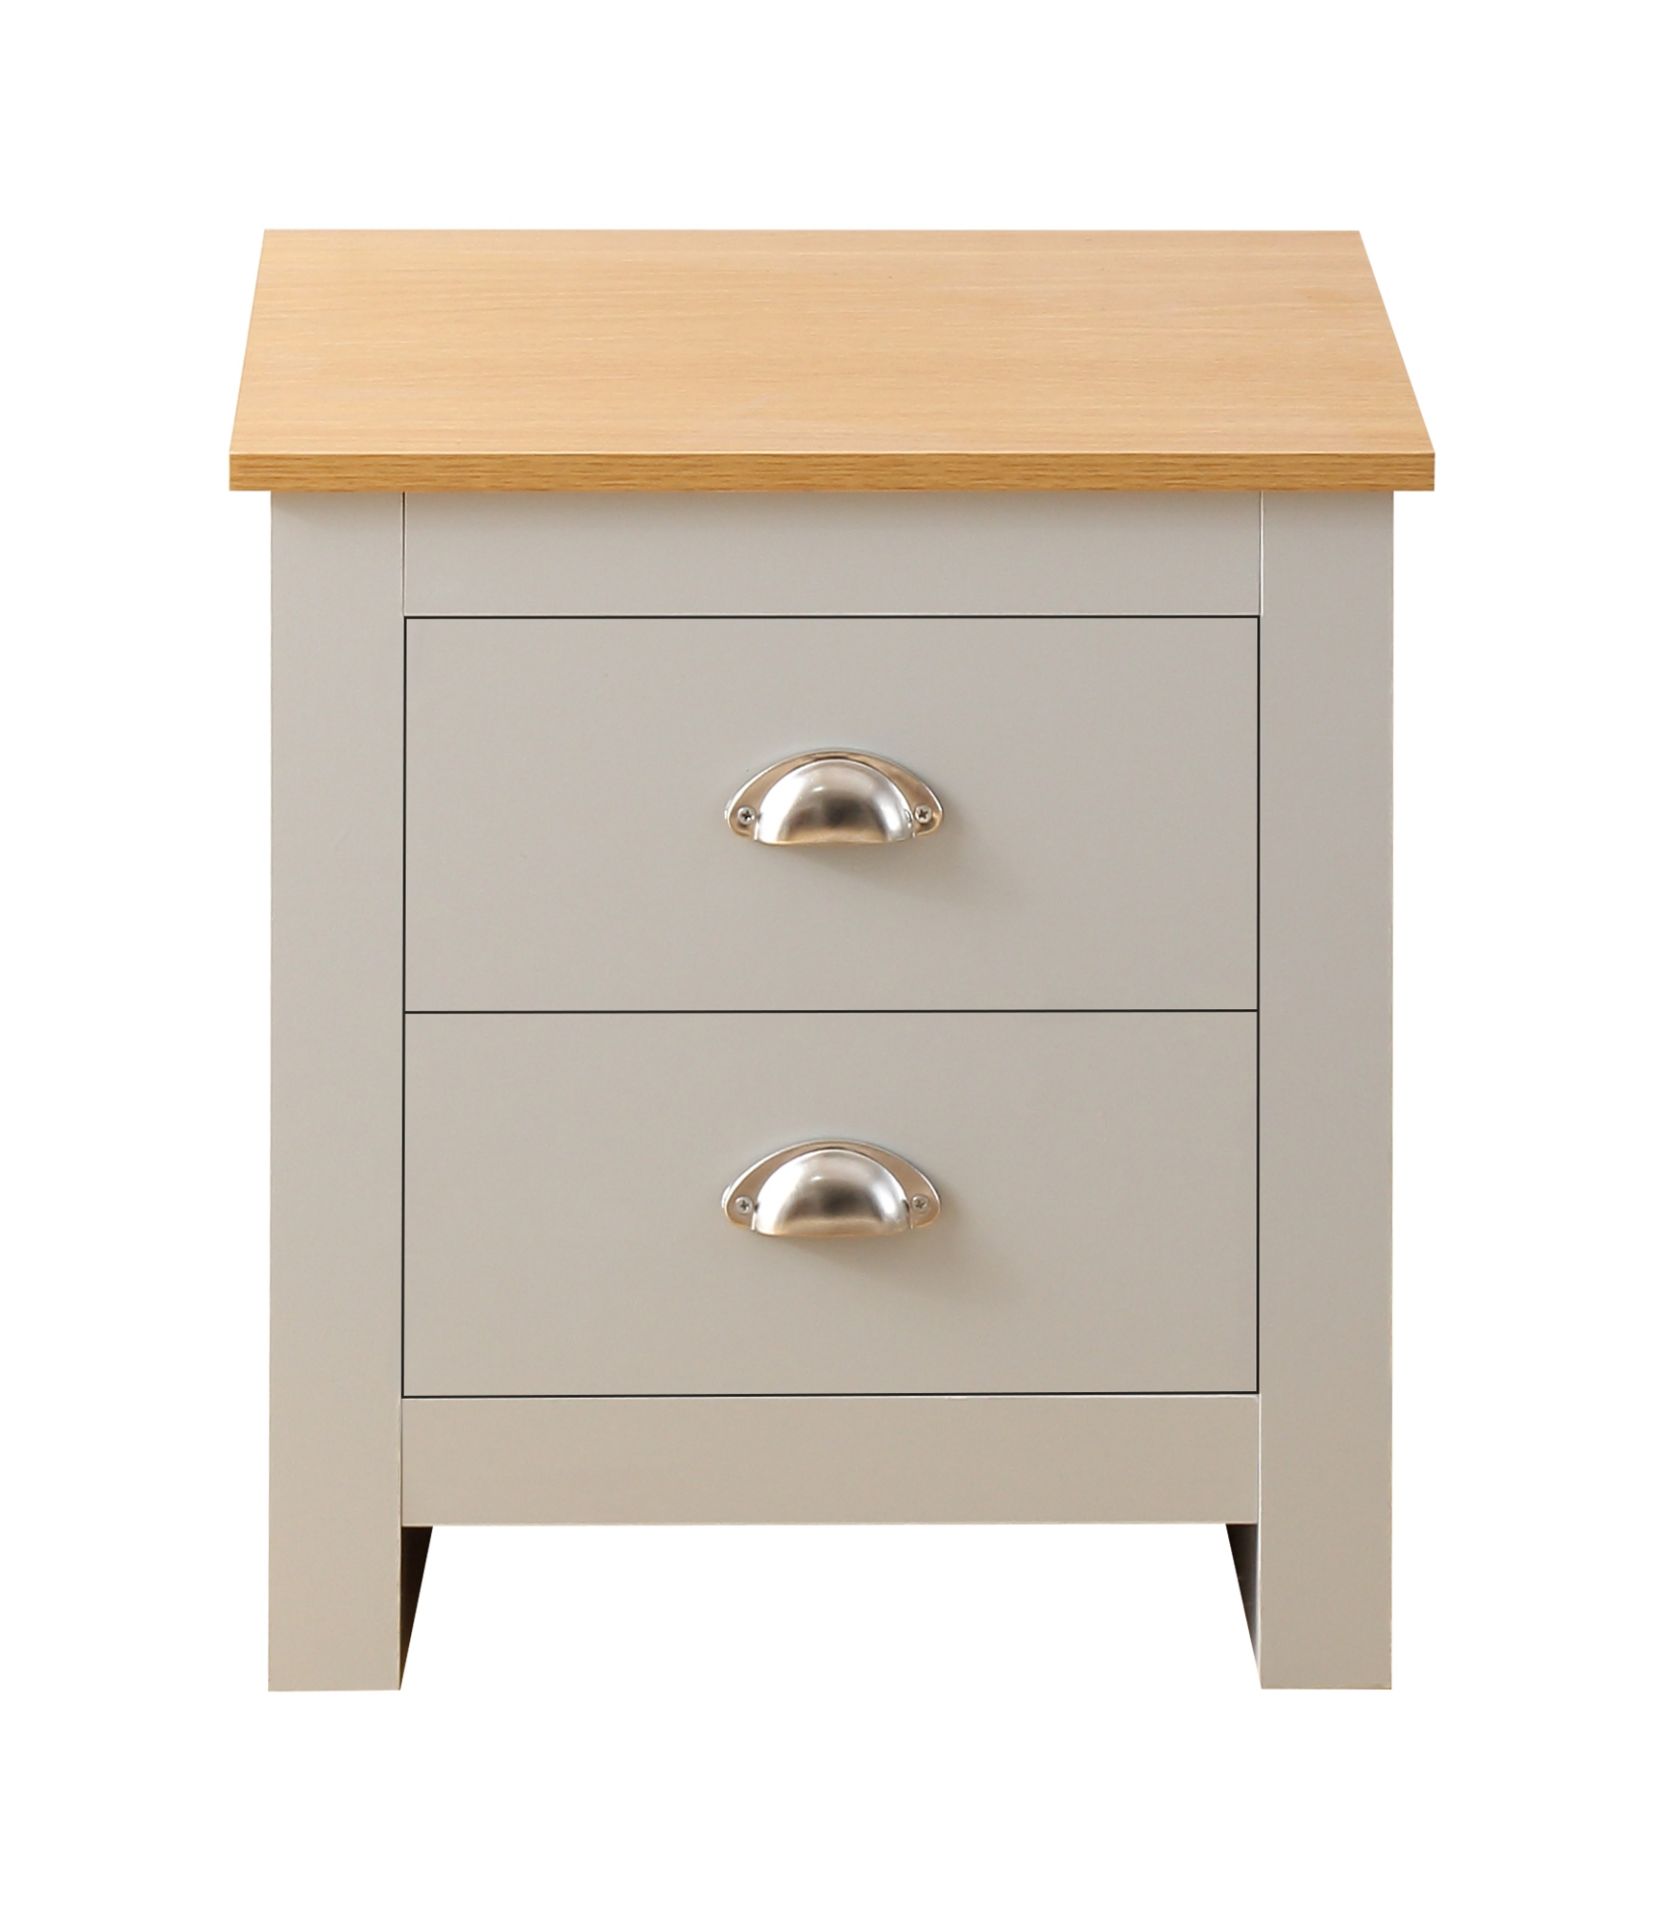 2 X BRAND NEW FLAT PACKED GREY WITH OAK TOP SHAKER-INSPIRED STYLISH DESIGN BEDSIDES - Image 2 of 4